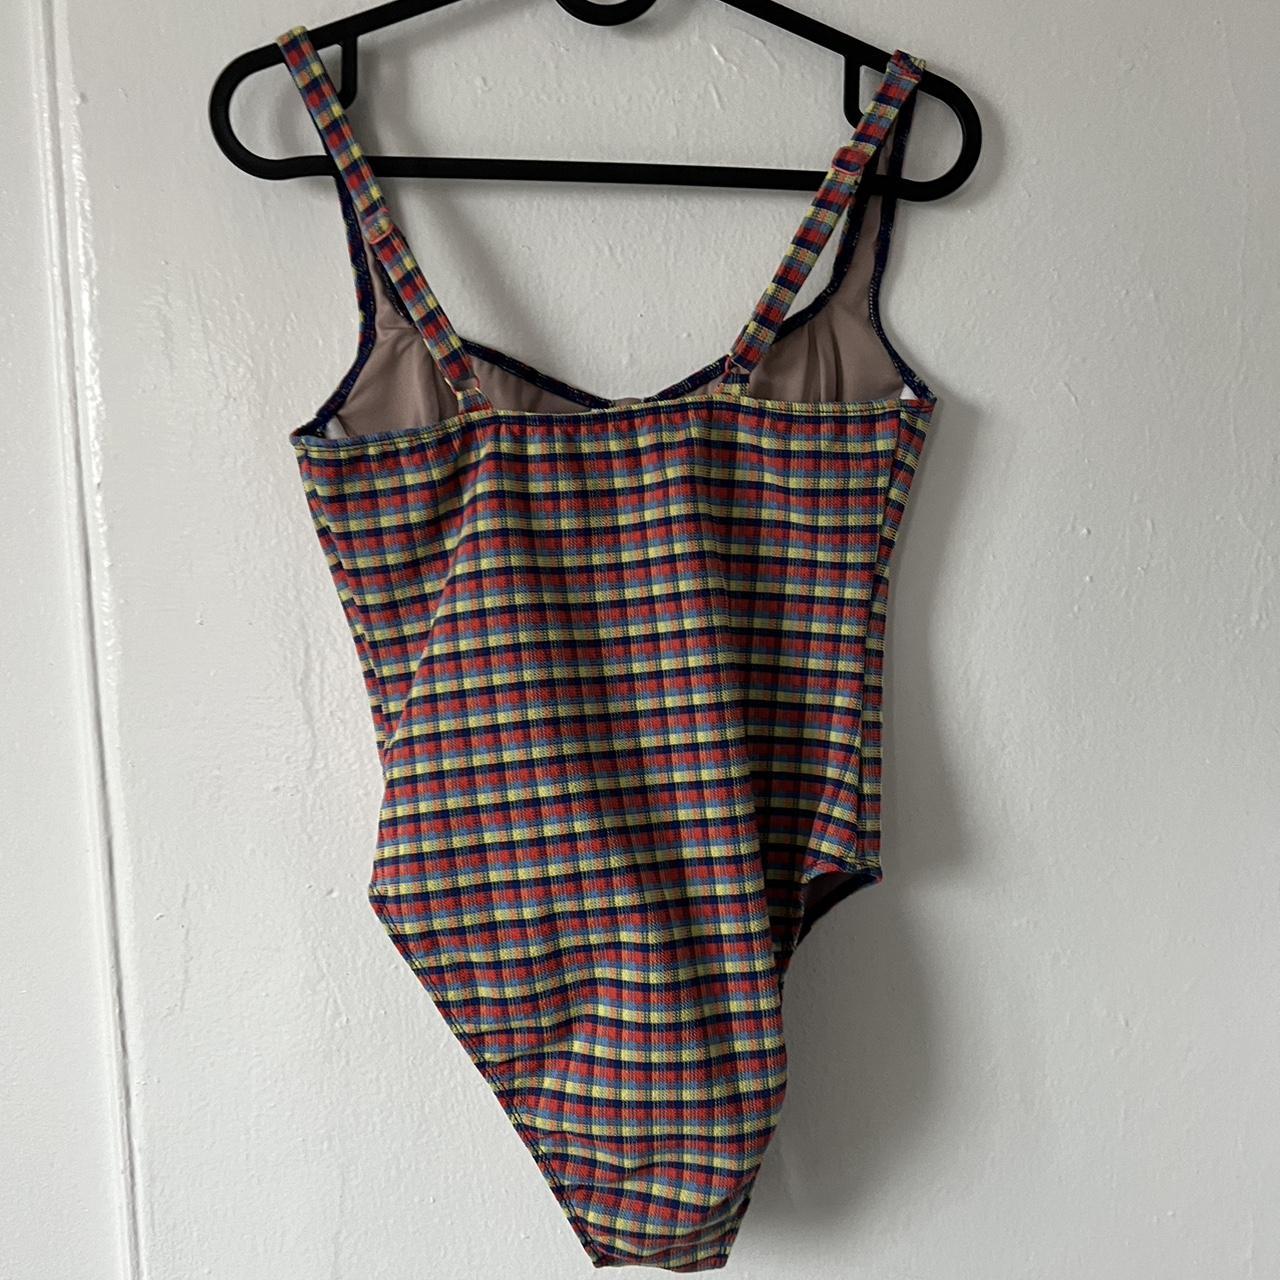 The Seea Ginger One Piece - Size Small Amazing... - Depop